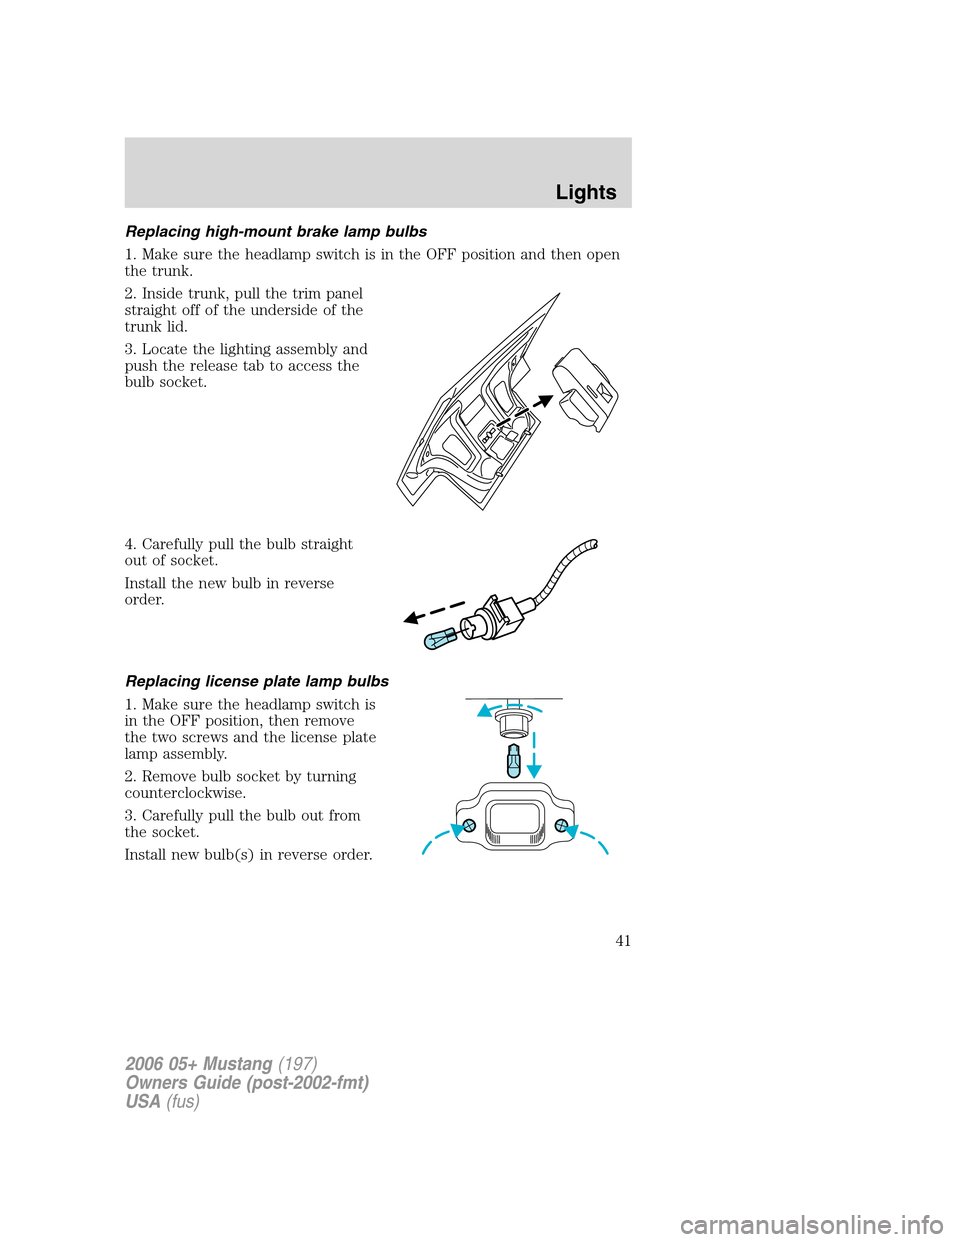 FORD MUSTANG 2006 5.G Owners Manual Replacing high-mount brake lamp bulbs
1. Make sure the headlamp switch is in the OFF position and then open
the trunk.
2. Inside trunk, pull the trim panel
straight off of the underside of the
trunk l